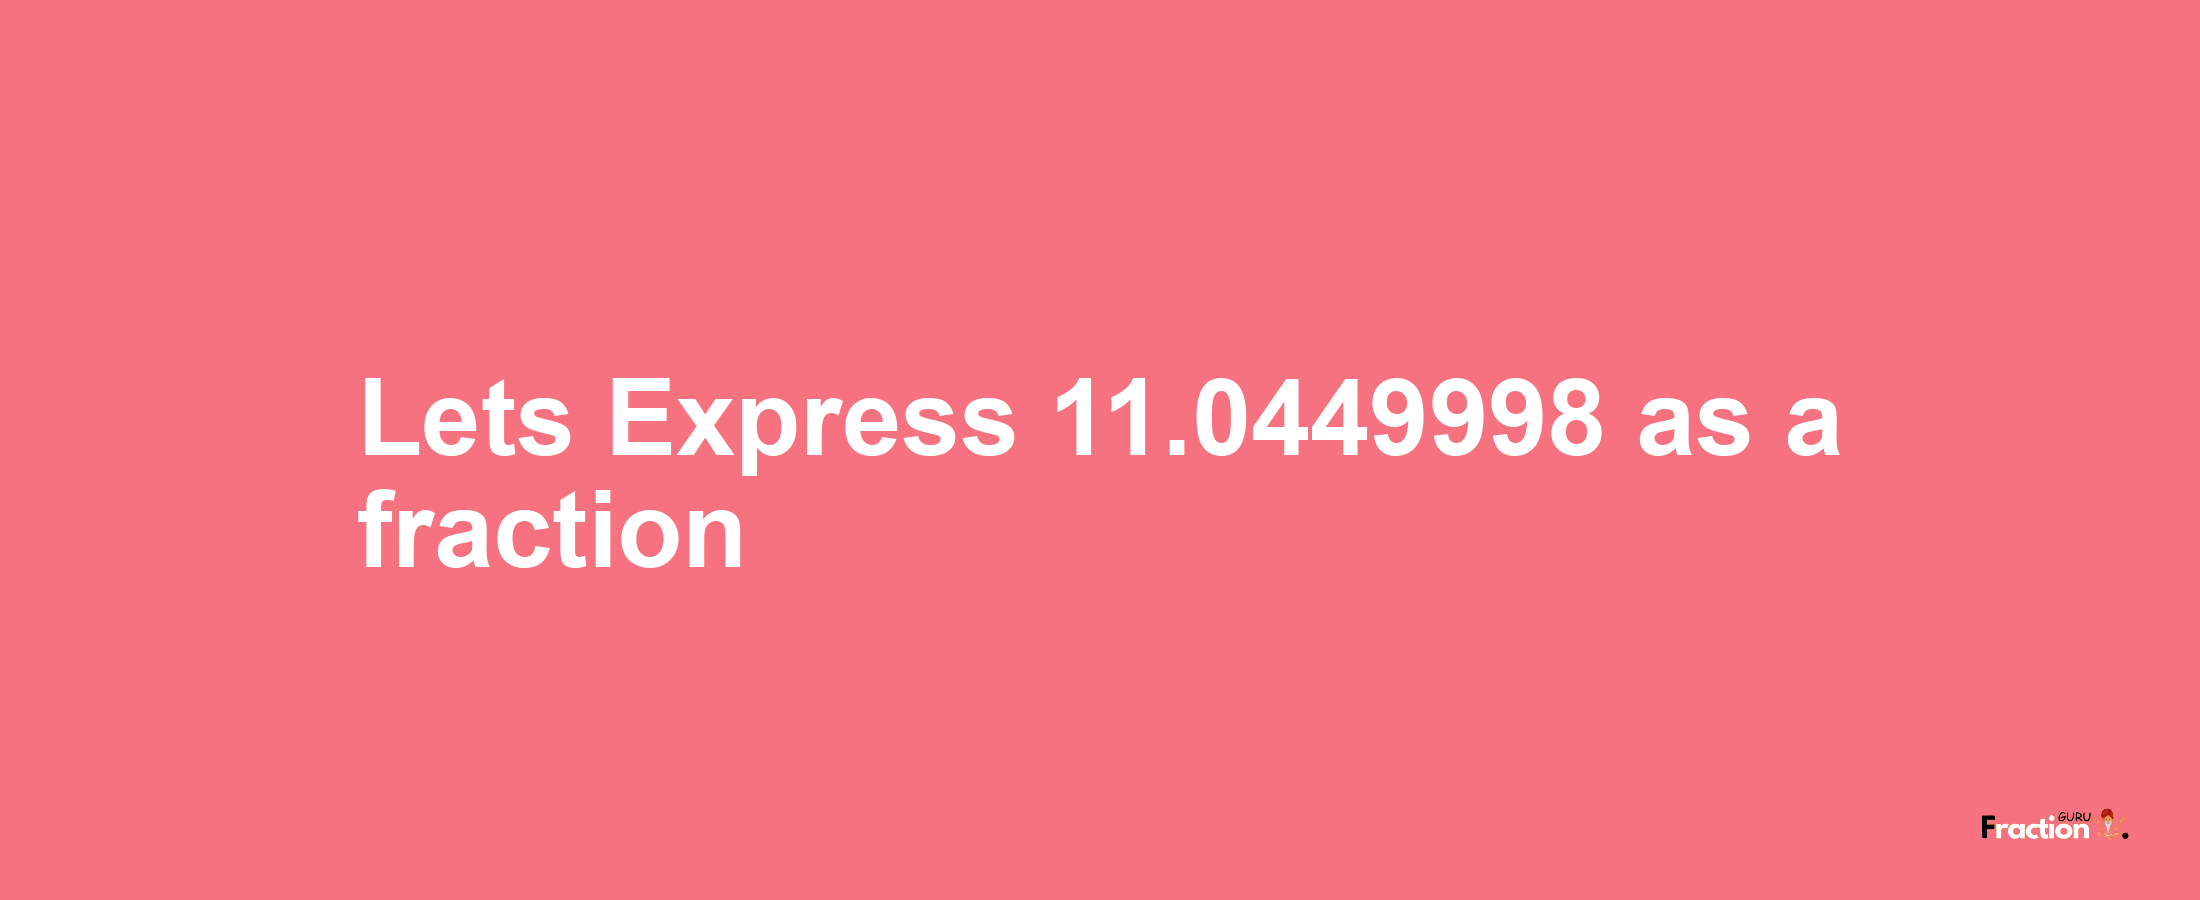 Lets Express 11.0449998 as afraction